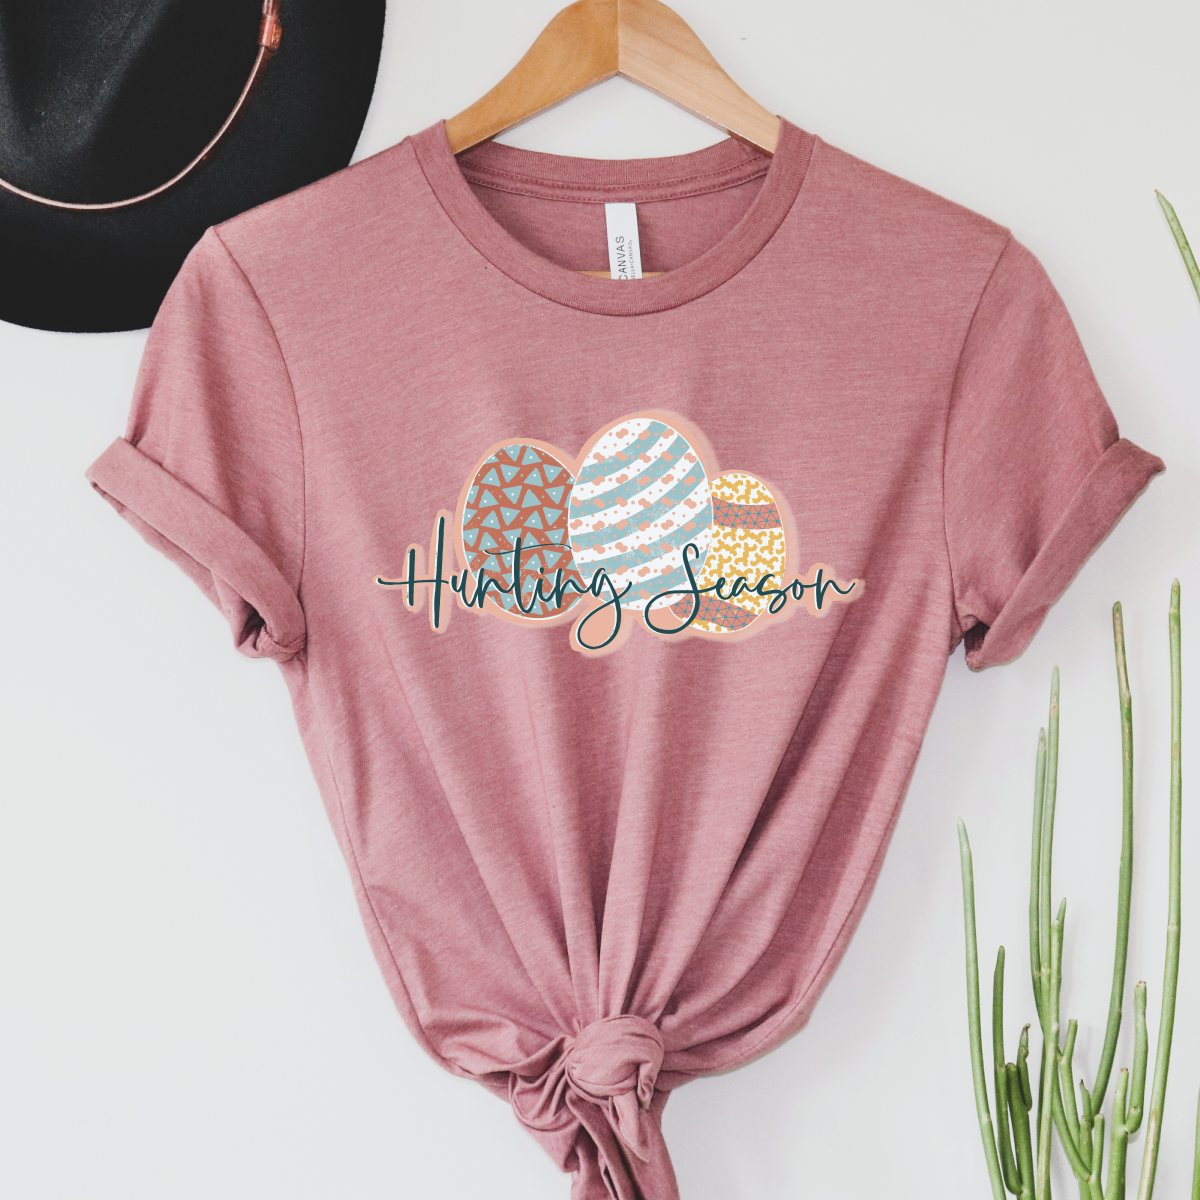 Mauve tee with a graphic of three differently decorated easter eggs and the words "Hunting Season" In a blue cursive font